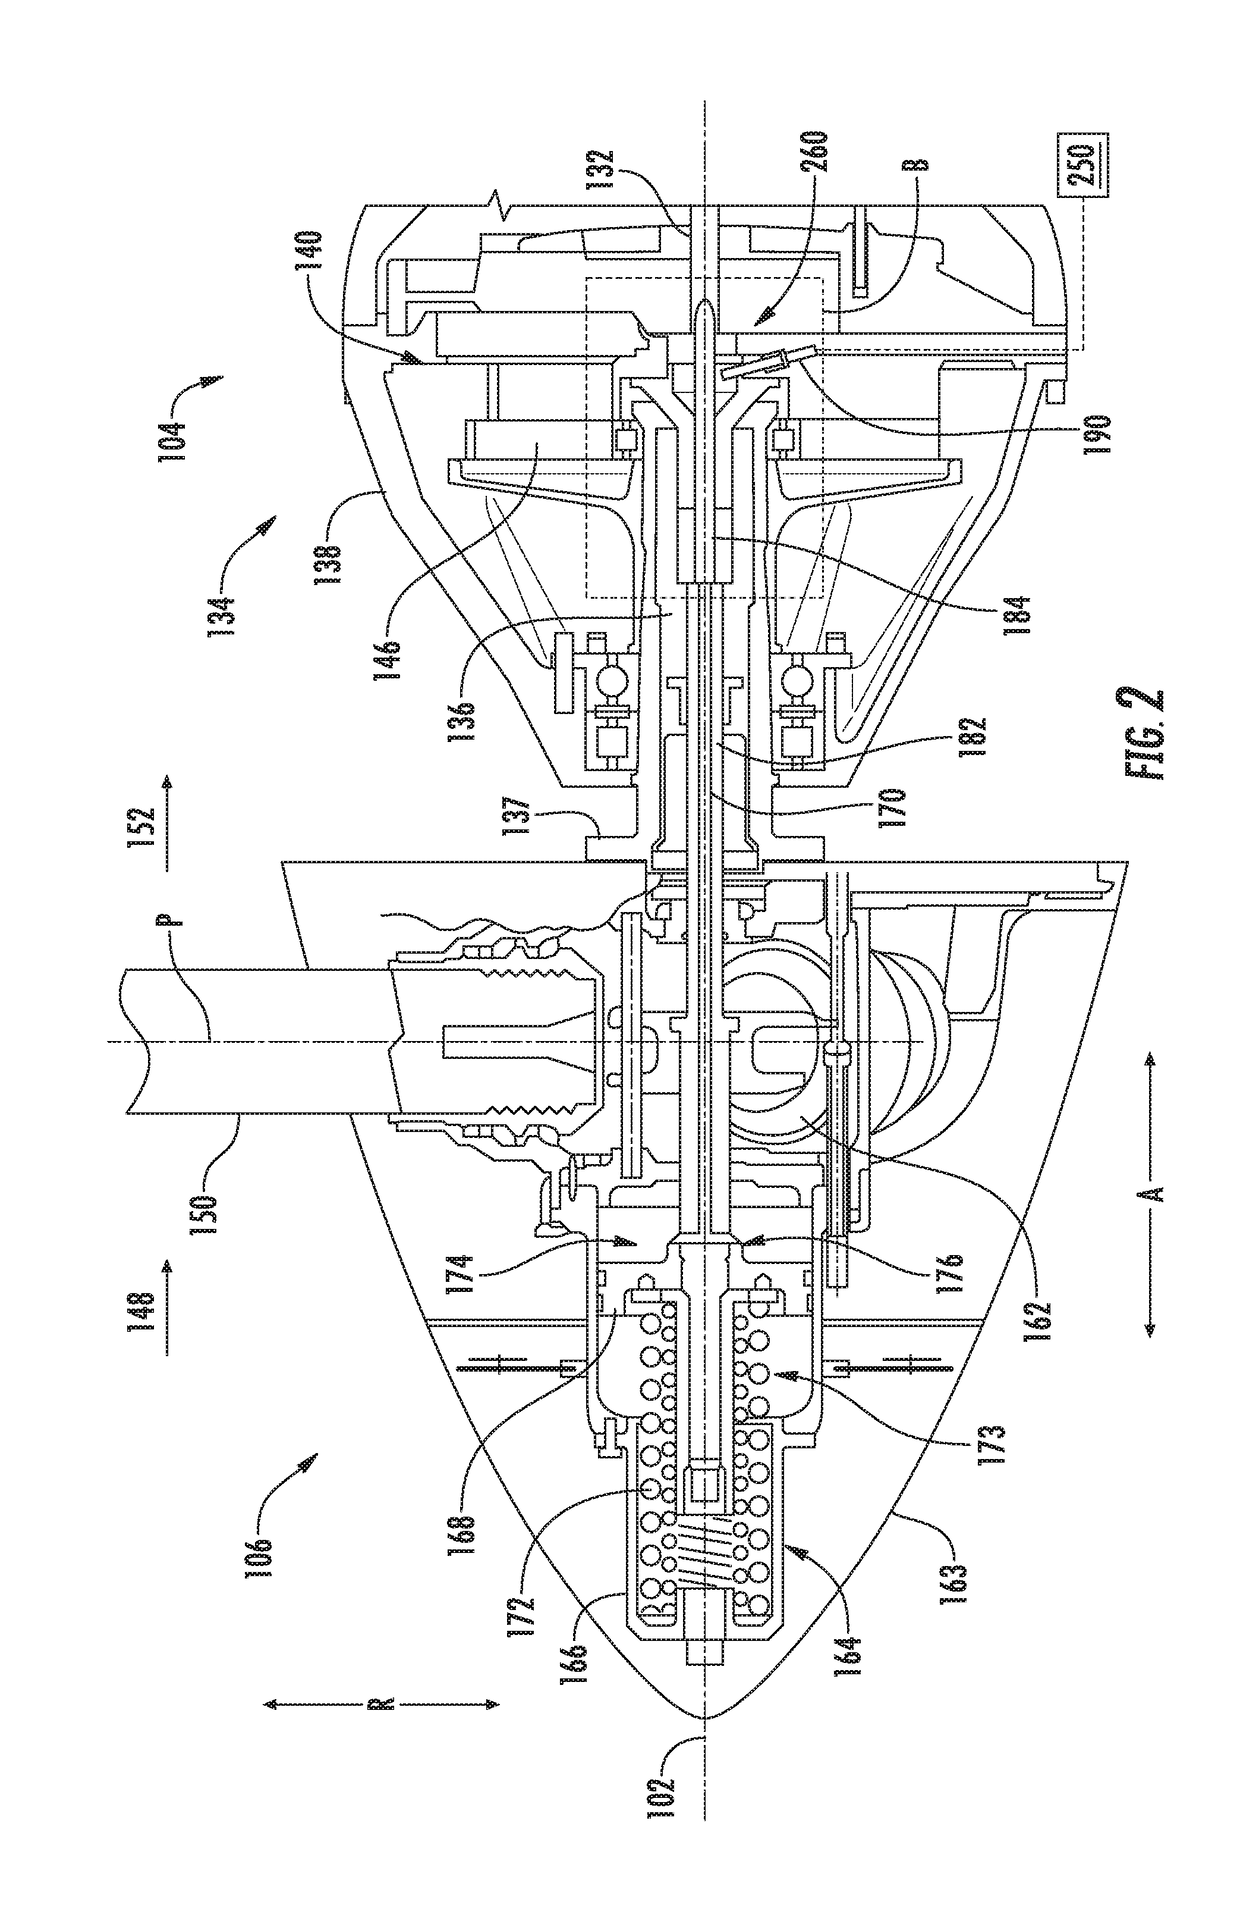 Systems and Methods for Electronic Measurement of Propeller Blade Angle